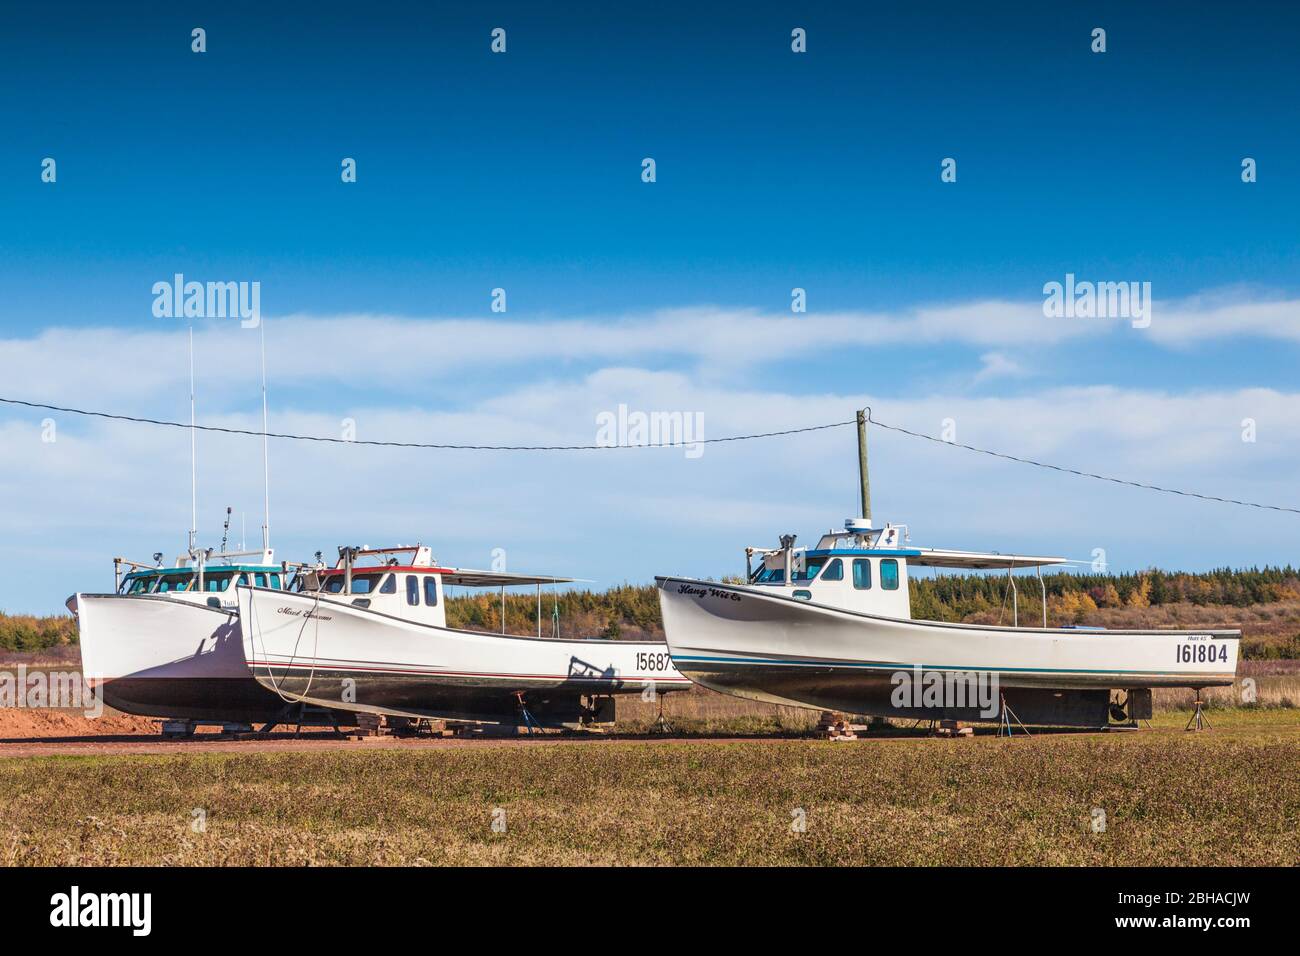 https://c8.alamy.com/comp/2BHACJW/canada-prince-edward-island-skinners-pond-fishing-boats-out-of-the-water-2BHACJW.jpg